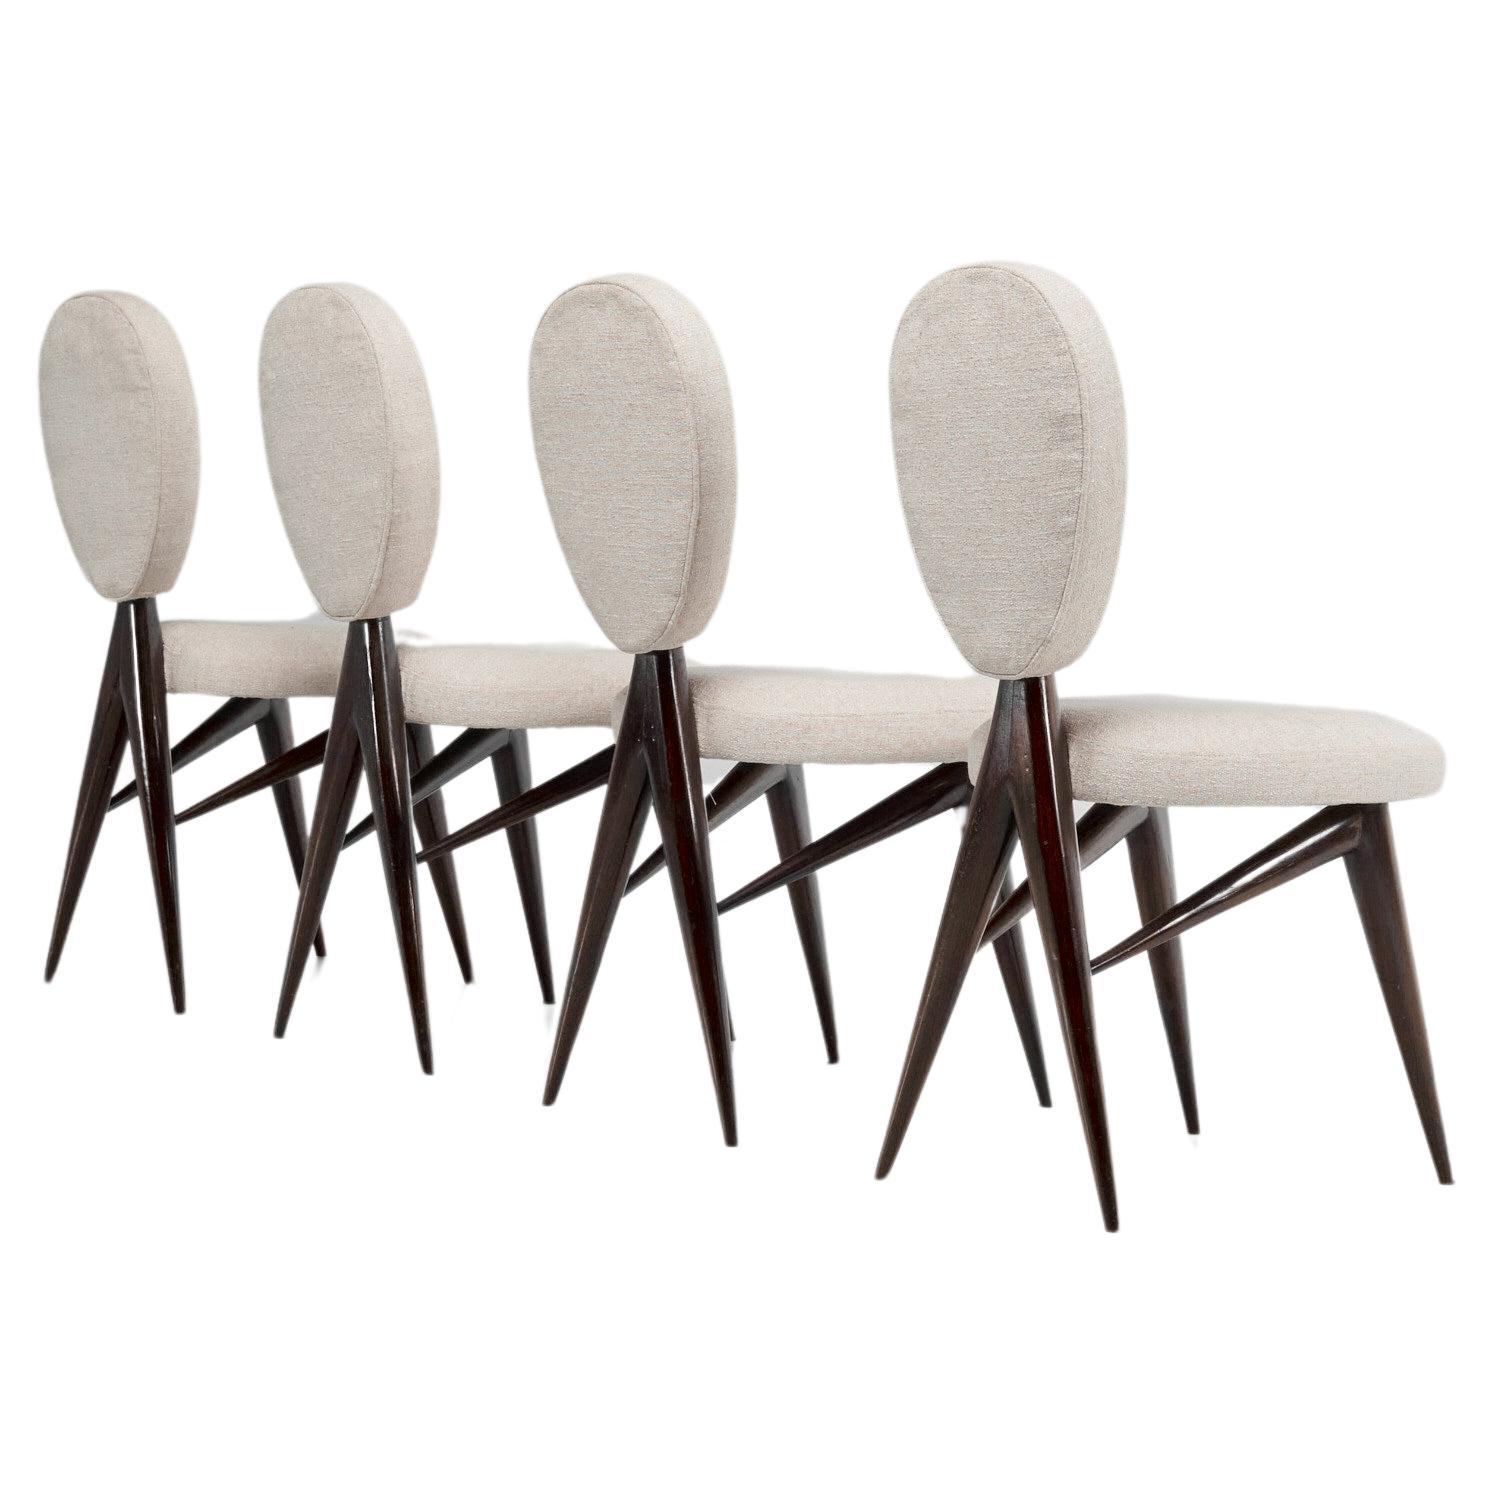 Giuseppe Scapinelli dinner chairs with spine feet Brazil 1950 For Sale